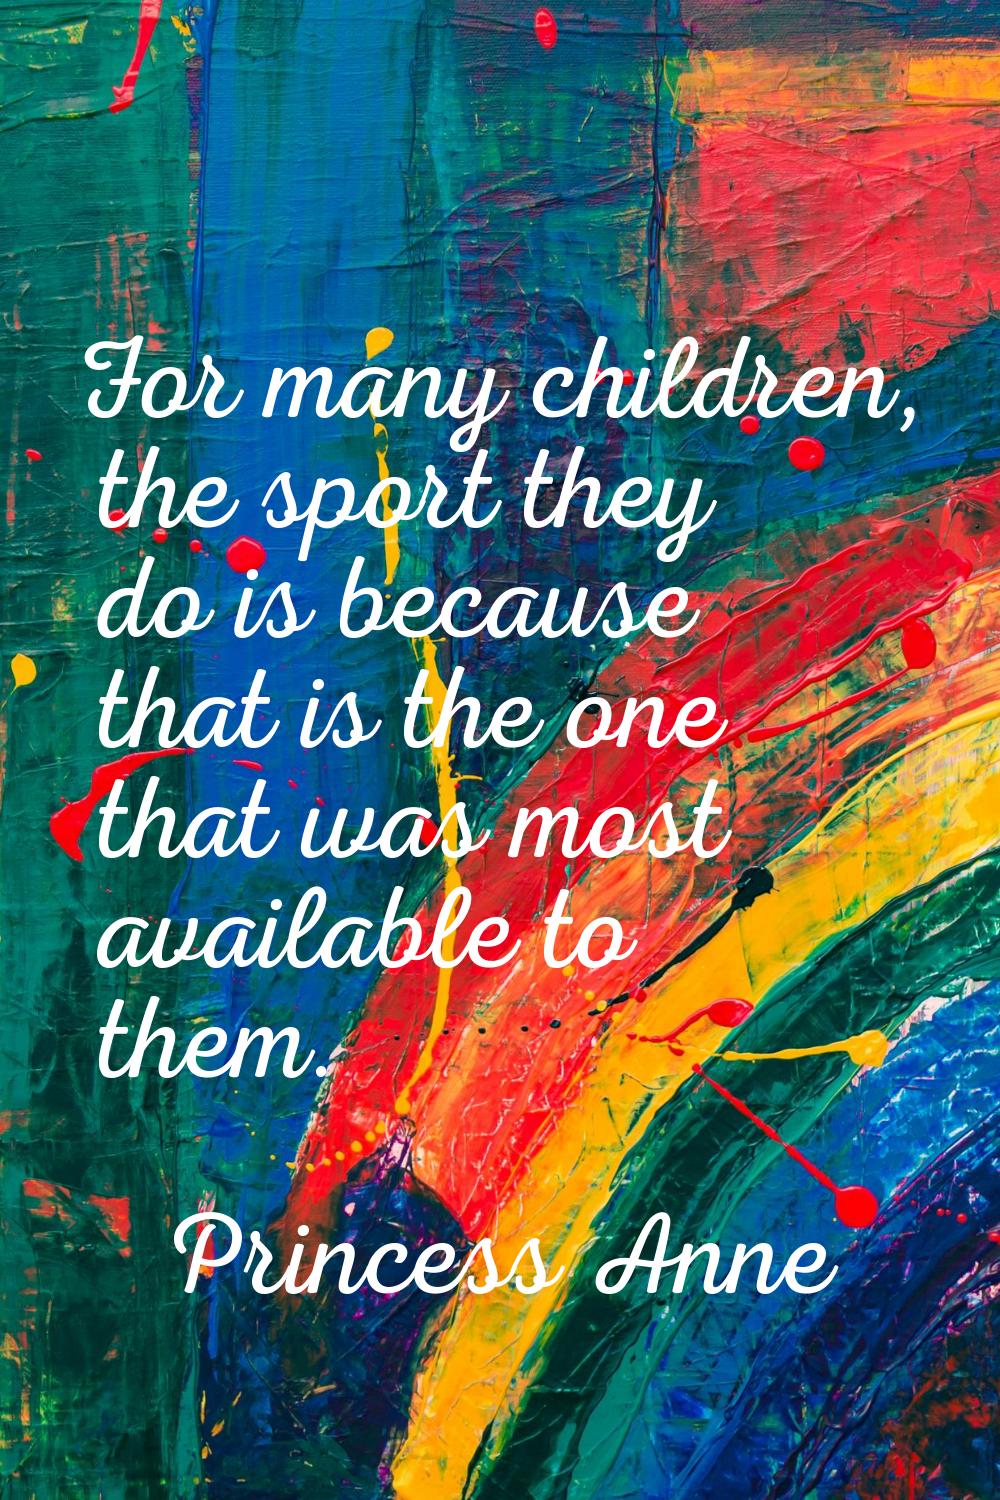 For many children, the sport they do is because that is the one that was most available to them.